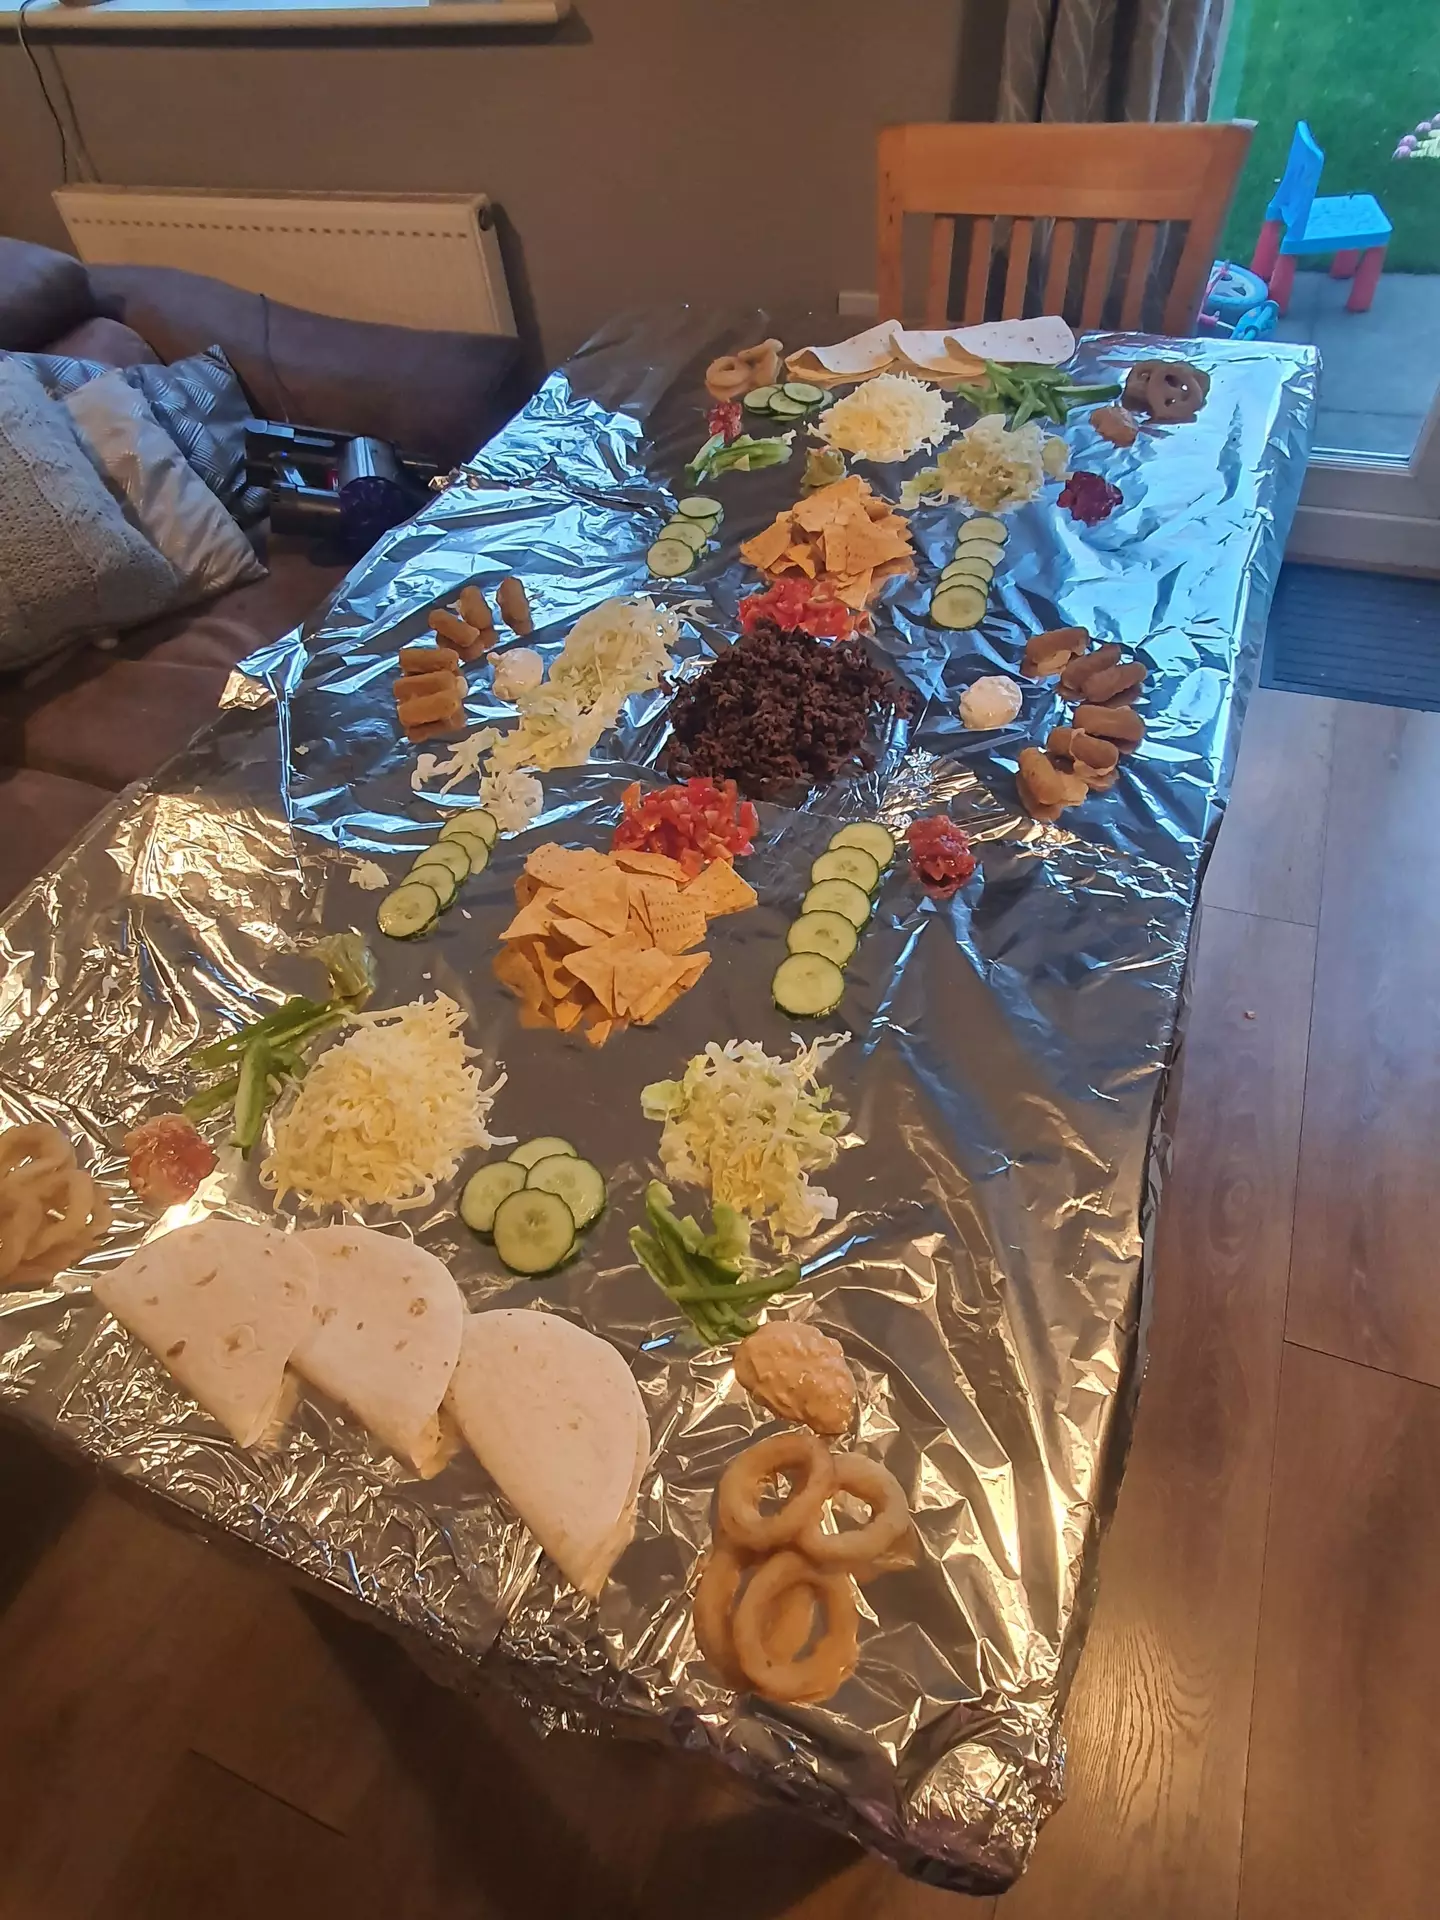 The family ate off tinfoil rather than using plates.